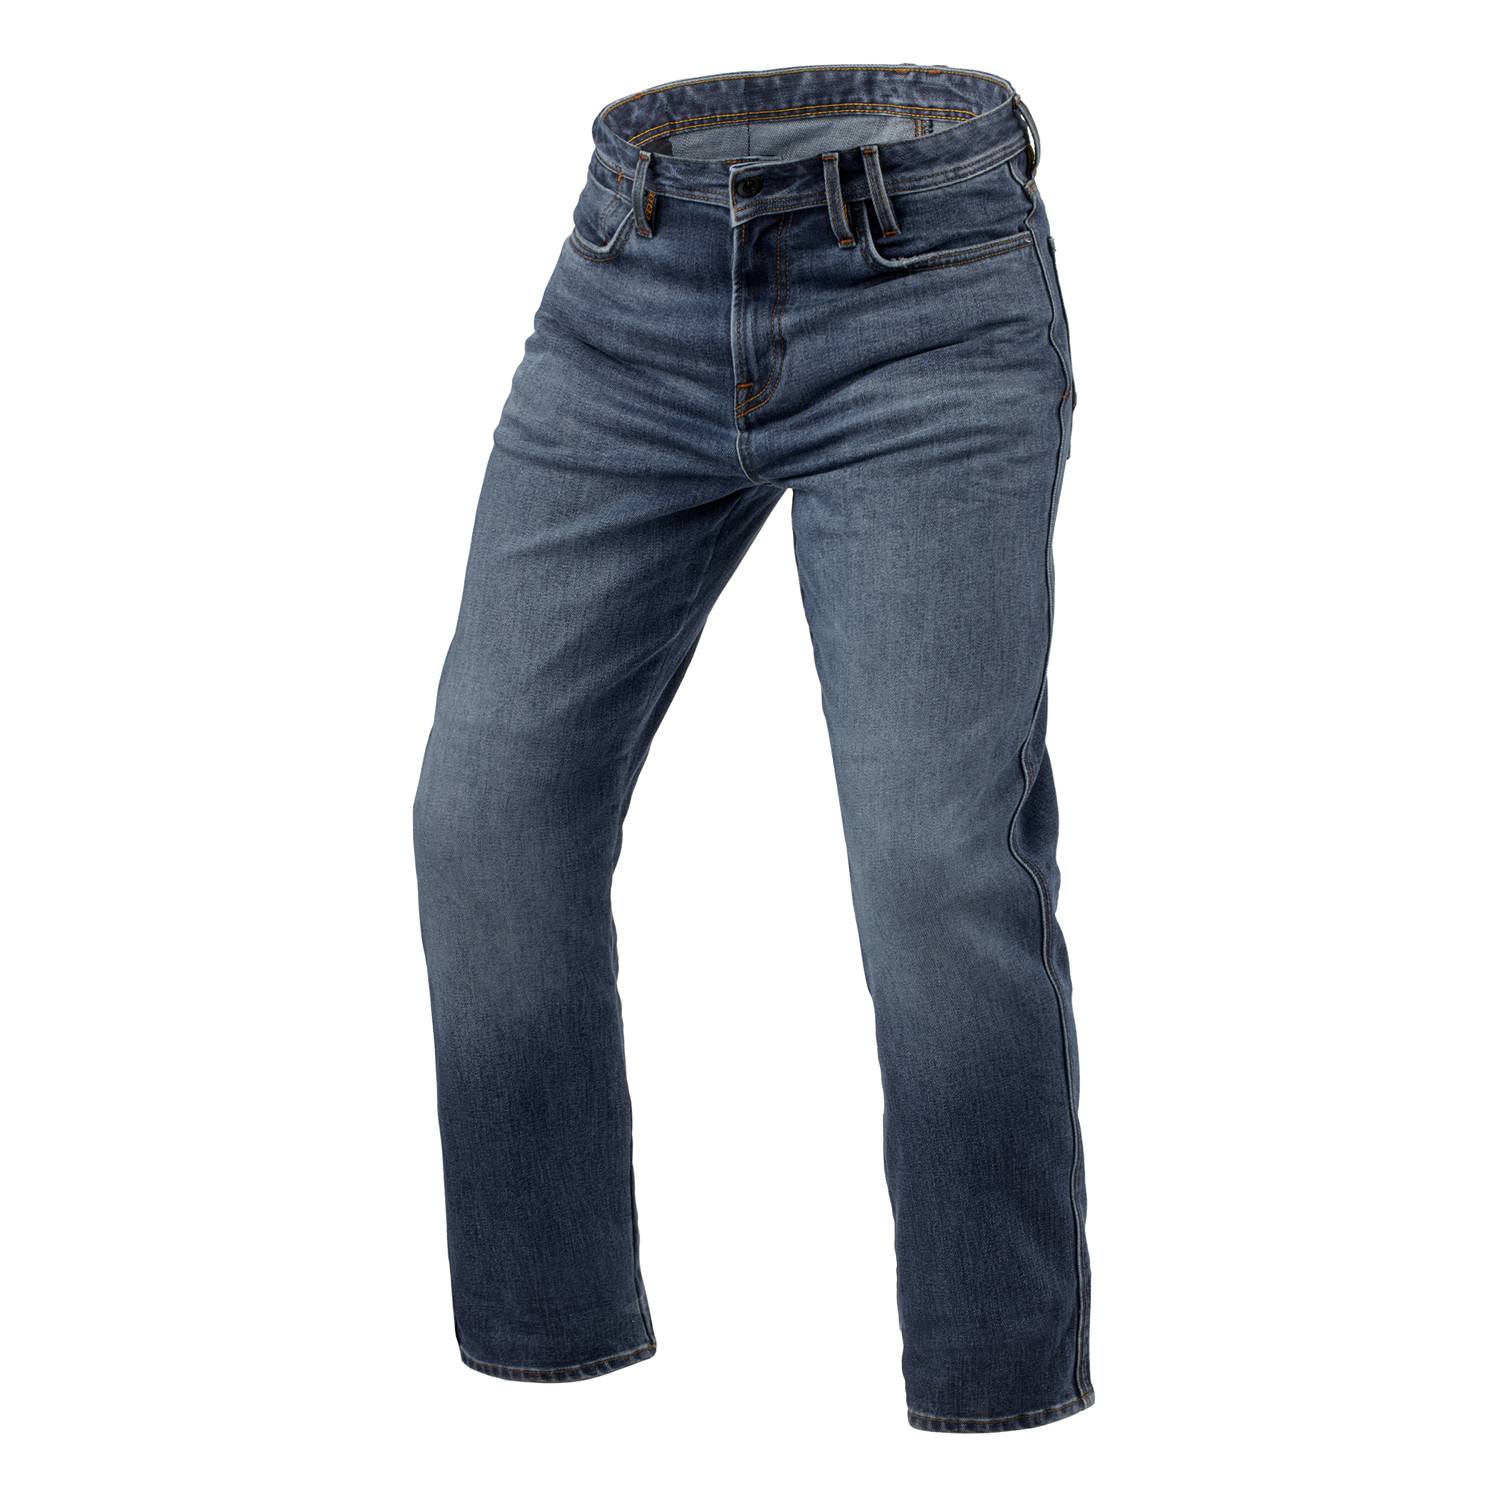 Image of EU REV'IT! Jeans Lombard 3 RF Mid Blue Stone L32 Motorcycle Jeans Taille L32/W30